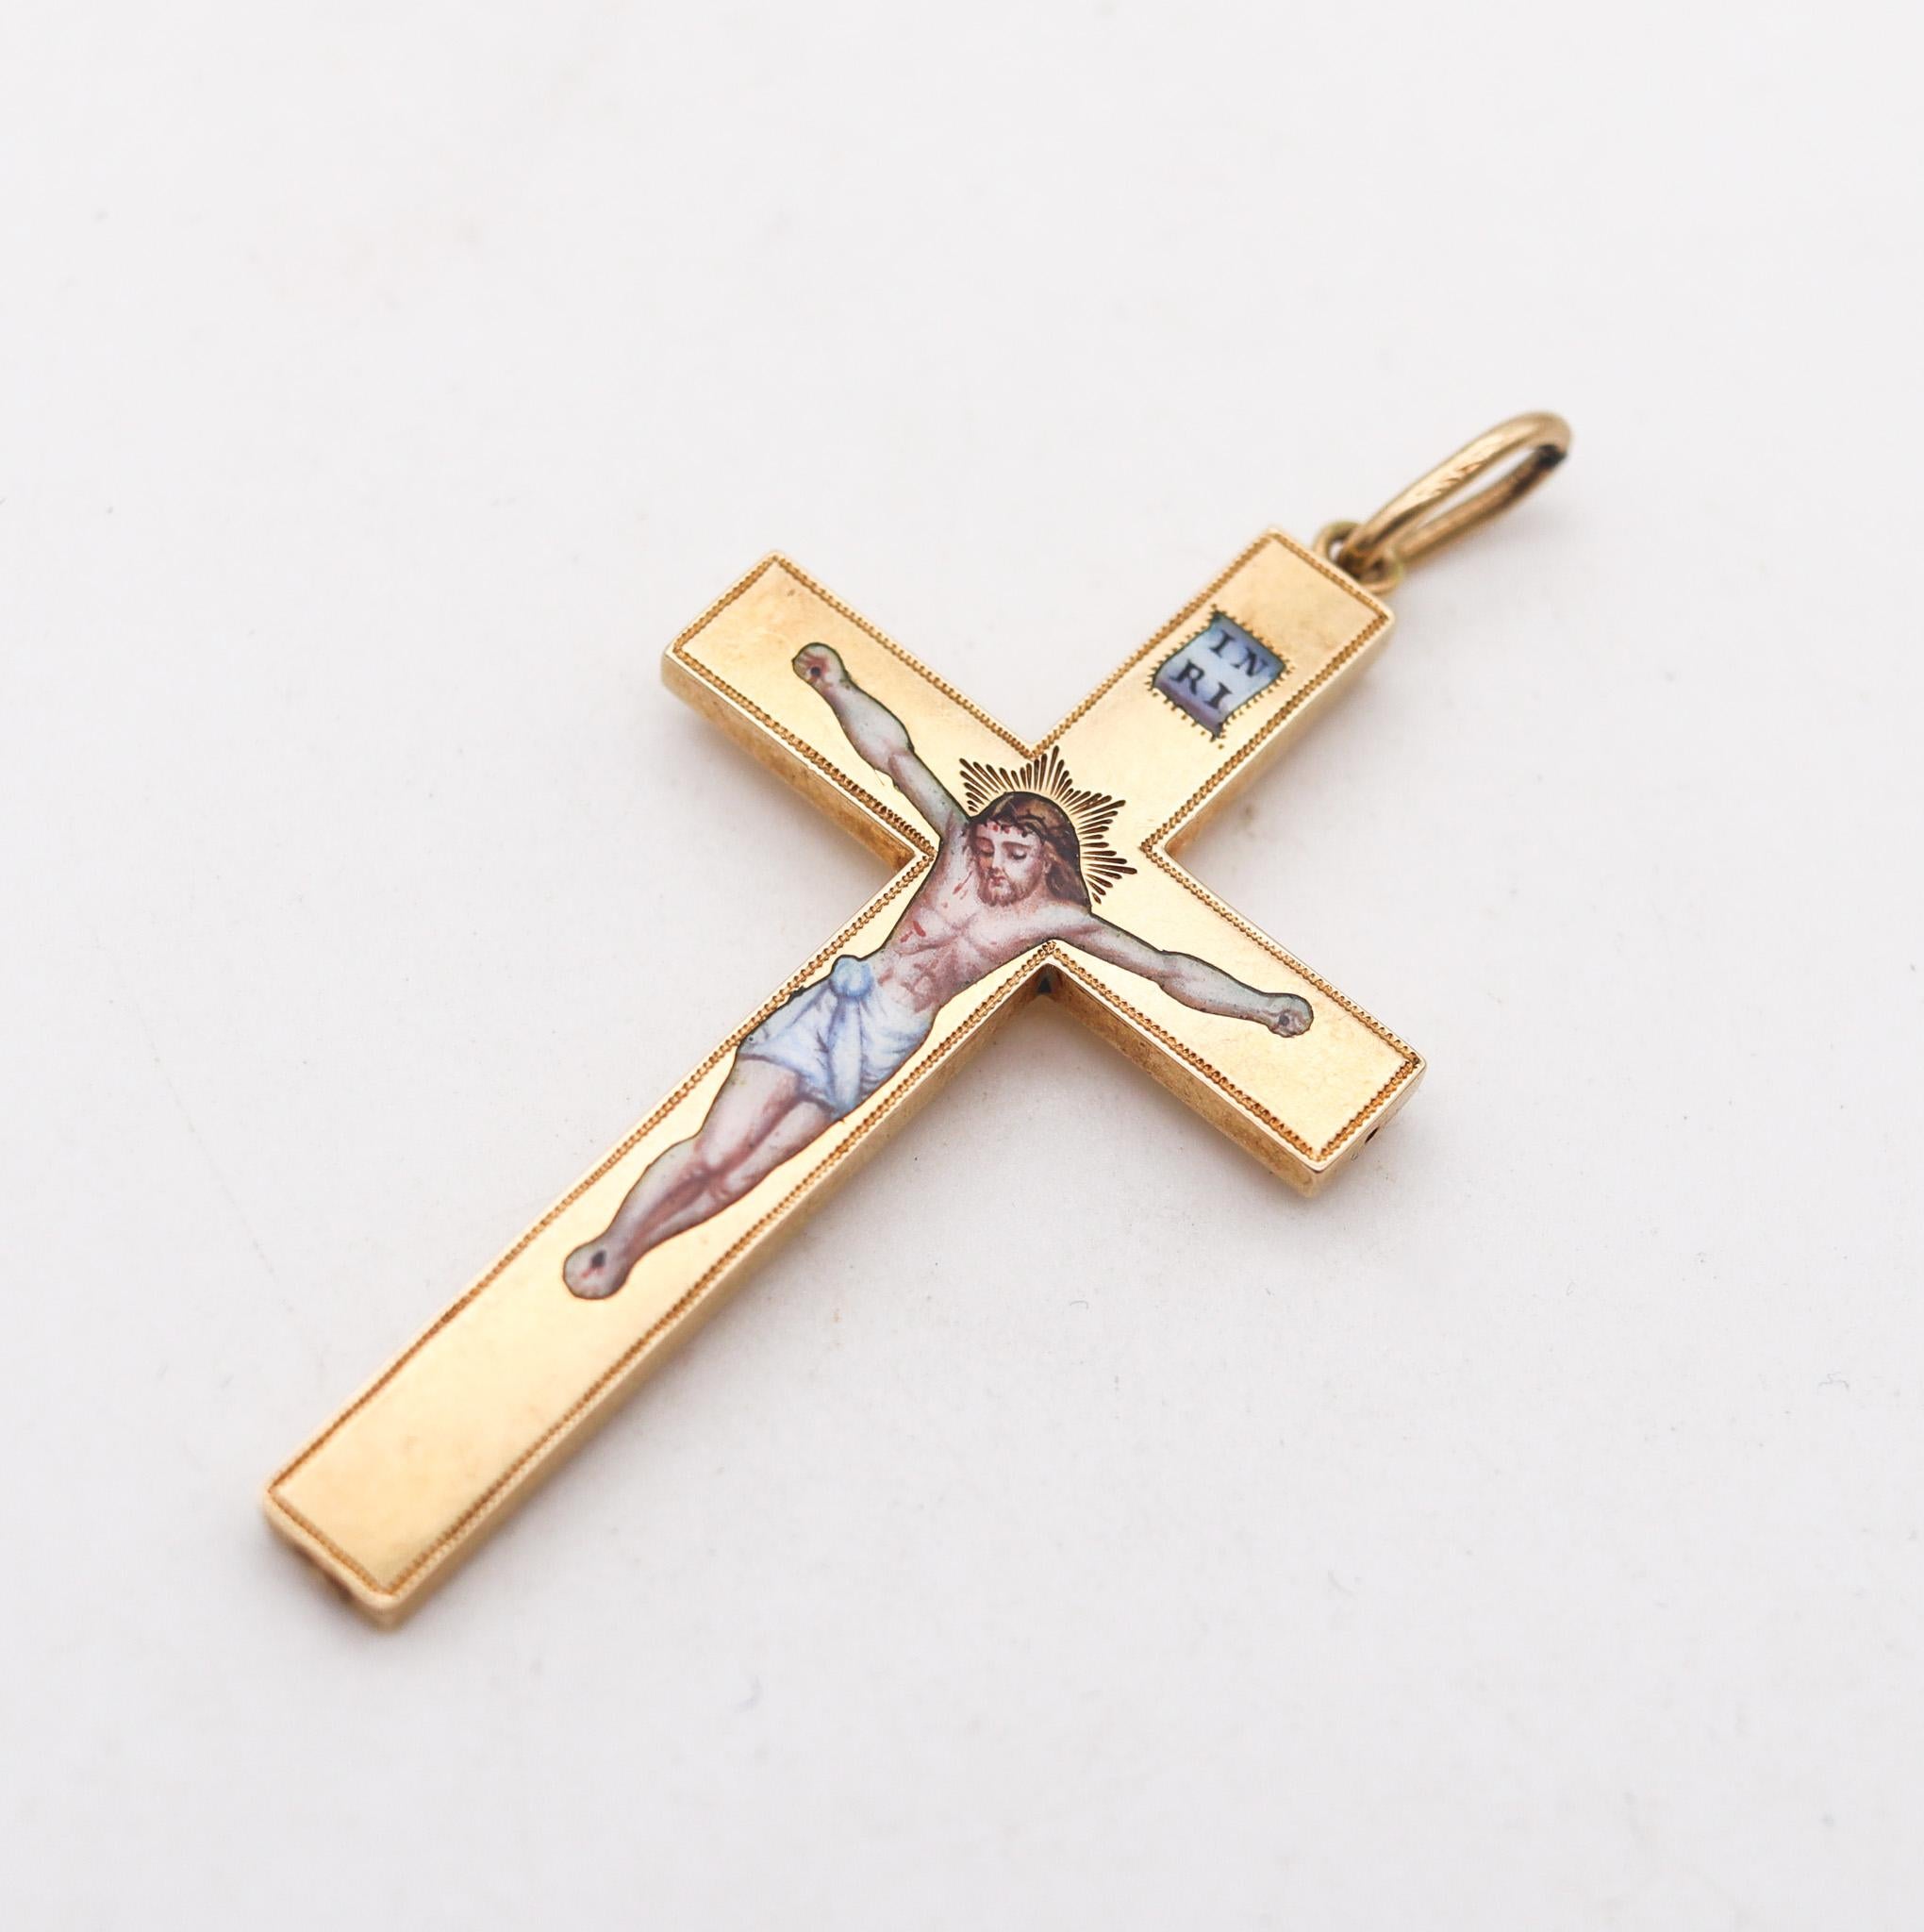 Byzantine revival enameled Christian Cross

Fabulous antique cross, created in Europe in the middle of the 19th century, circa 1850. This exceptional rare cross has been crafted with Byzantine and renaissance revival patterns in solid yellow gold of